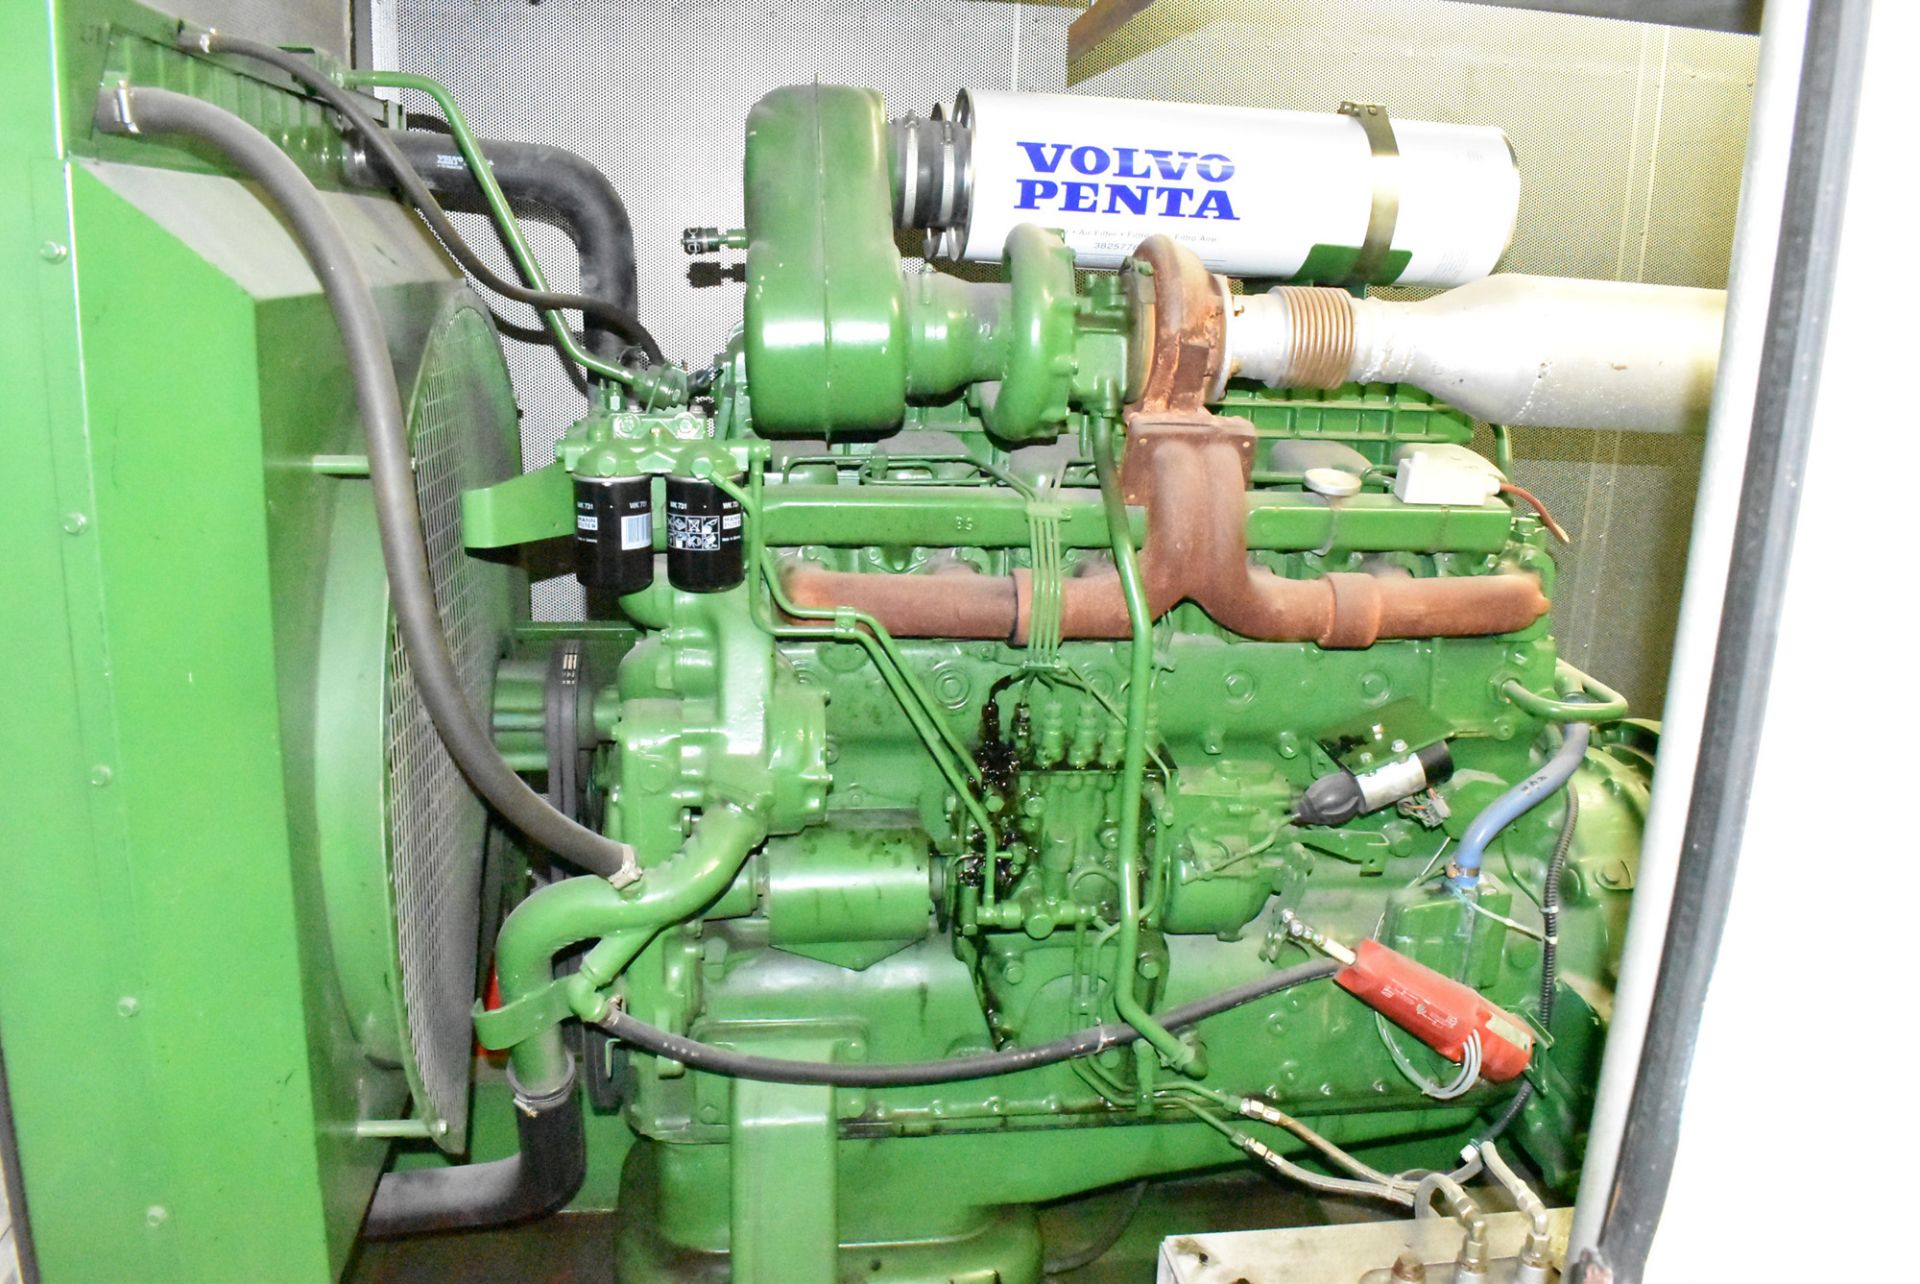 VOLVO PENTA-MARELLI MX 315 SA/4 SELF CONTAINED DIESEL GENERATOR SET WITH 275KVA/400V/3PH/50HZ/397A @ - Image 7 of 7